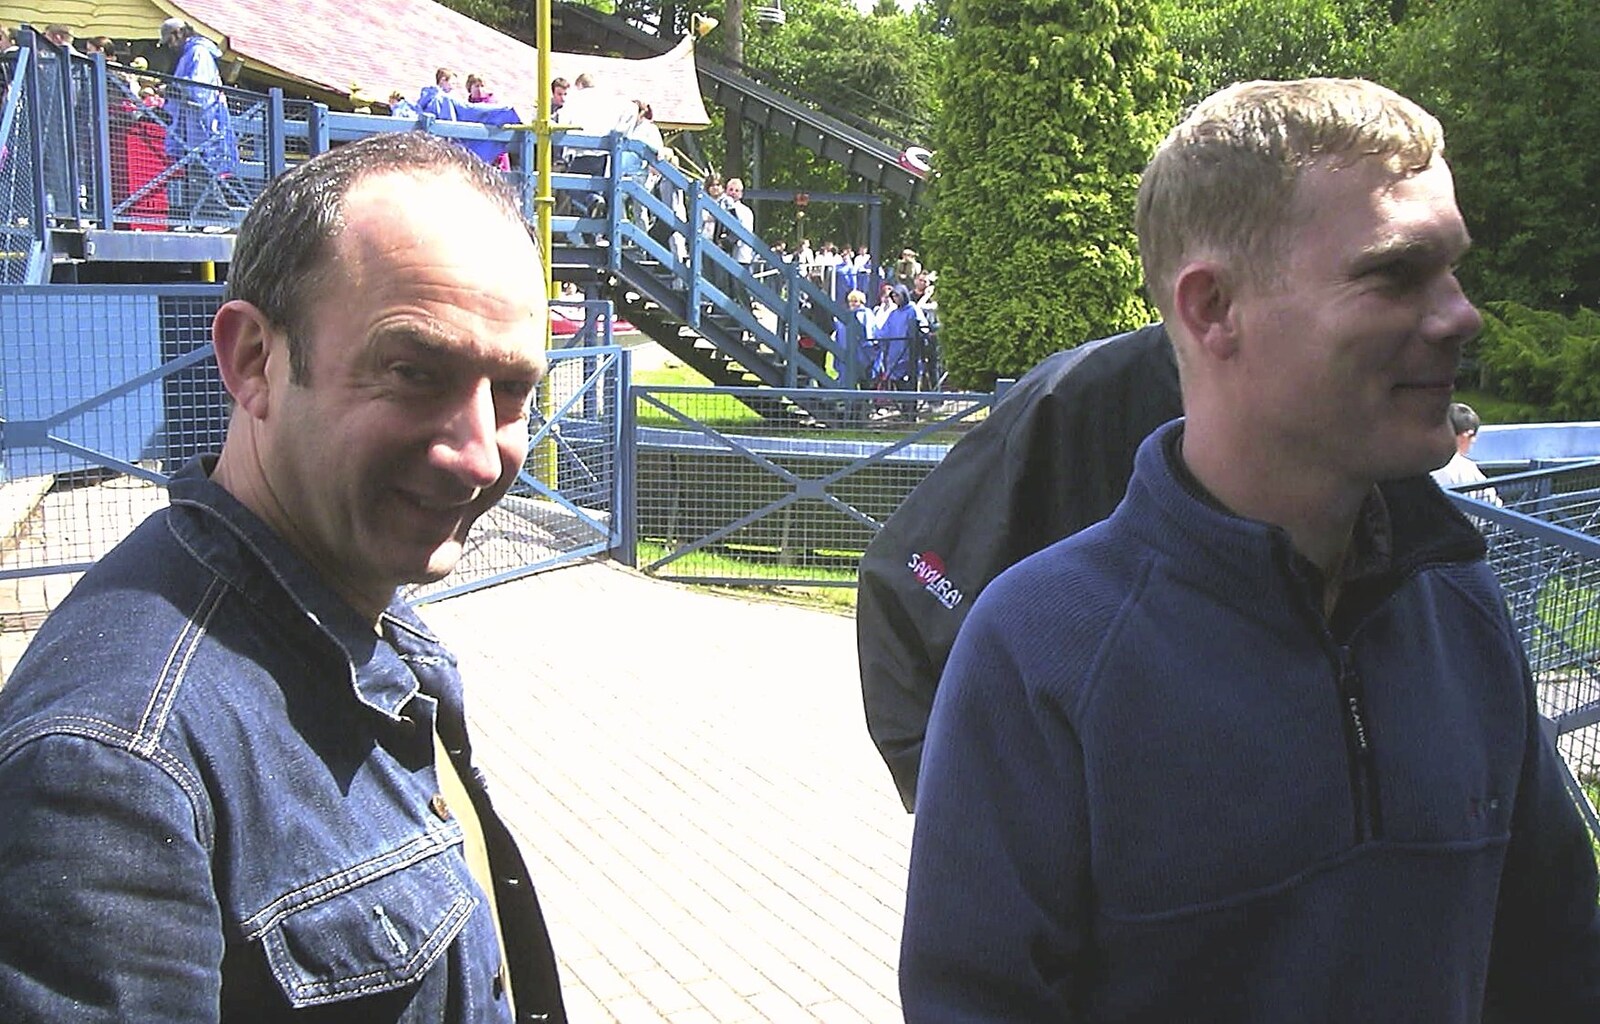 A Trip to Alton Towers, Staffordshire - 19th June 2004: DH and Mikey P